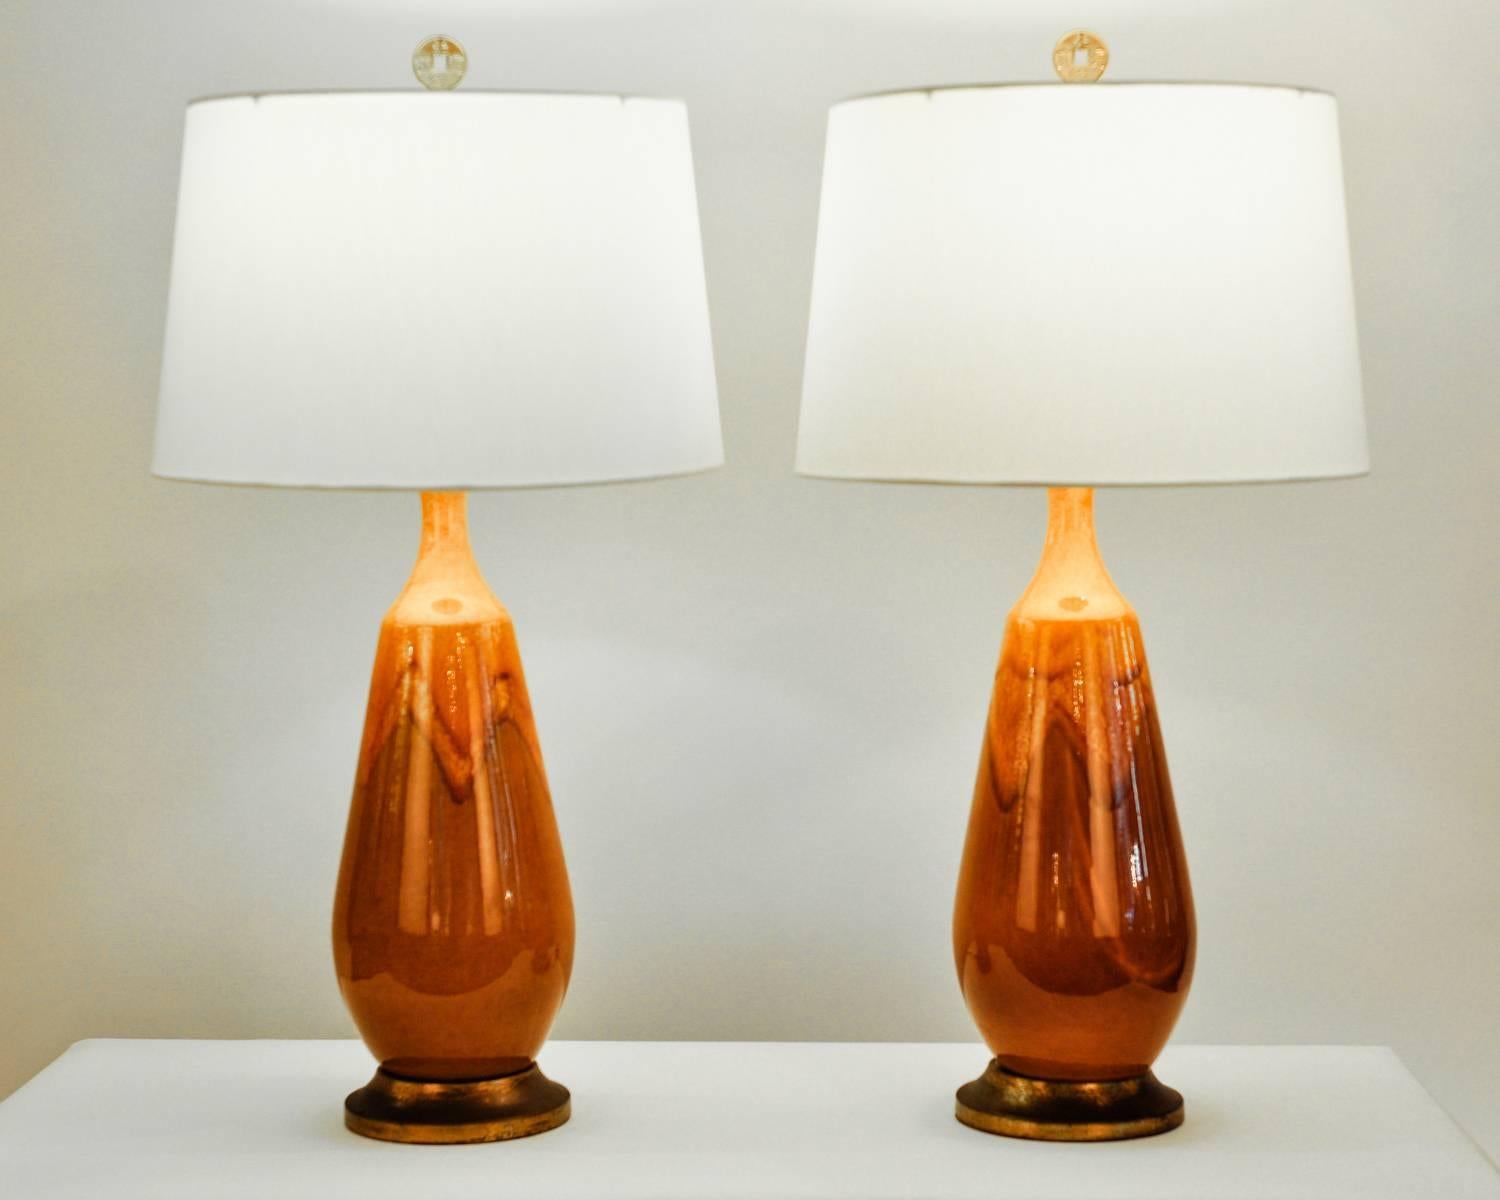 Vintage Pair of Porcelain Table Lamps with Brass Base 1